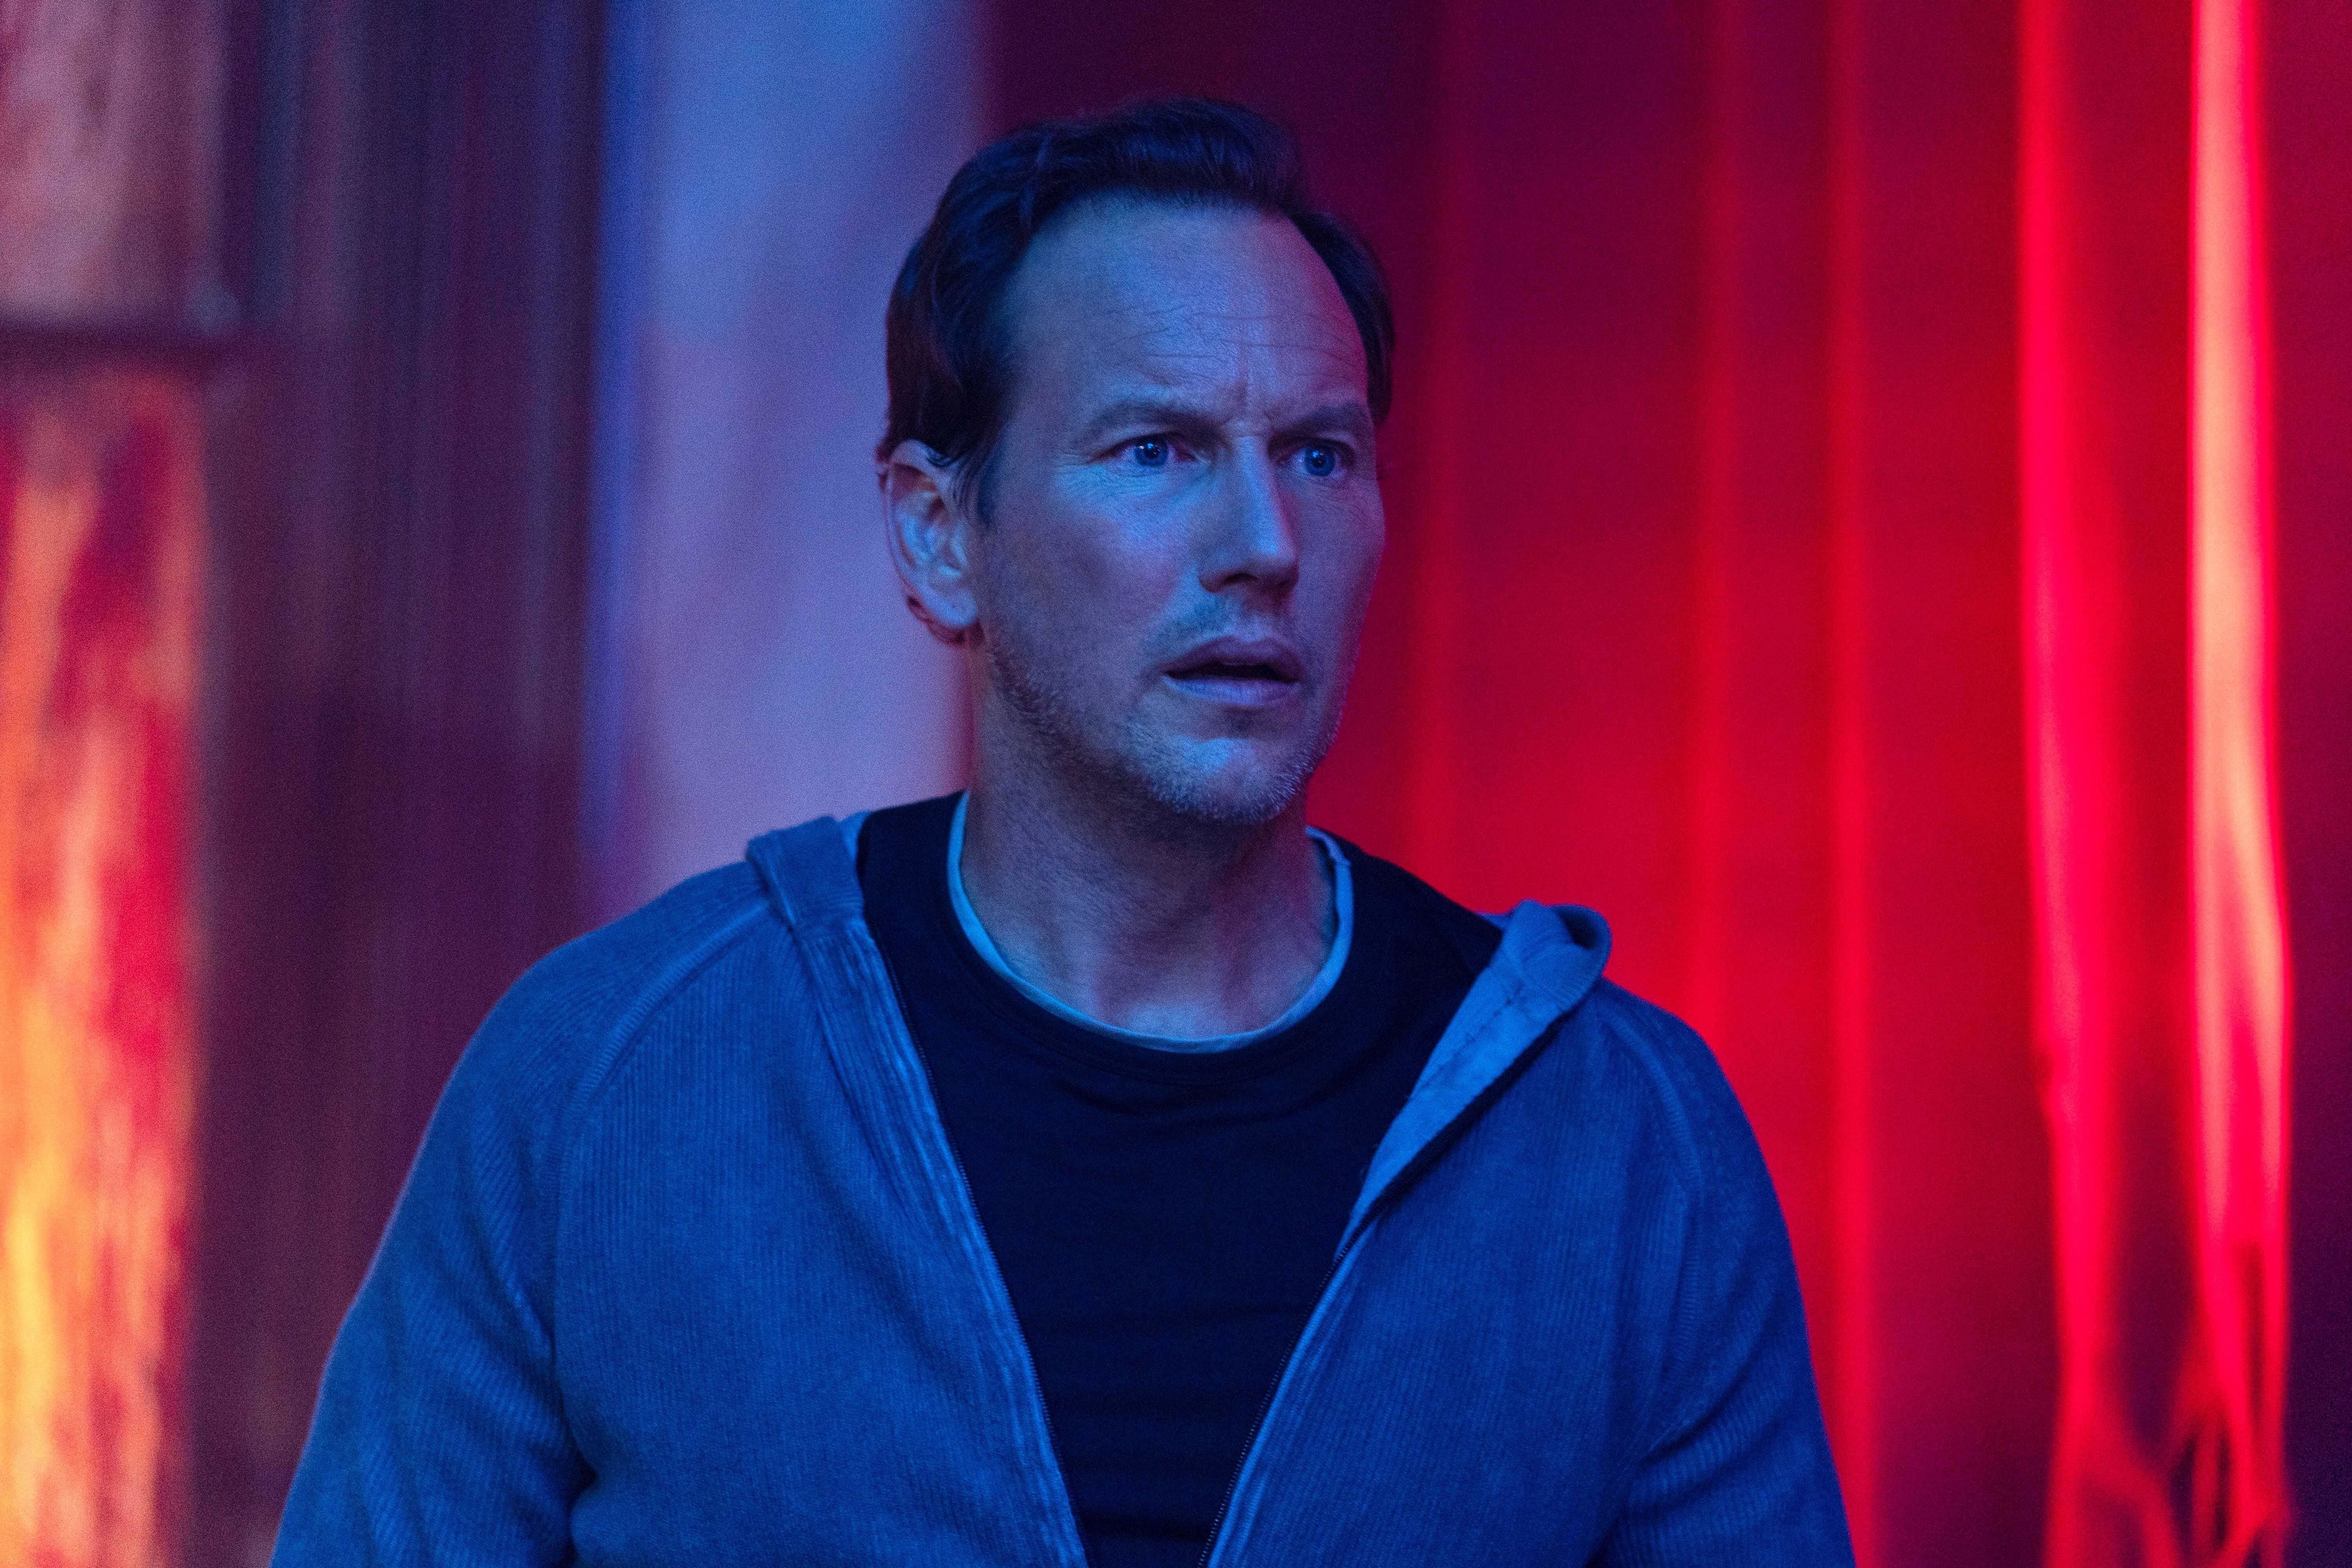 Patrick Wilson stands in a strange red room while soaked in blue light